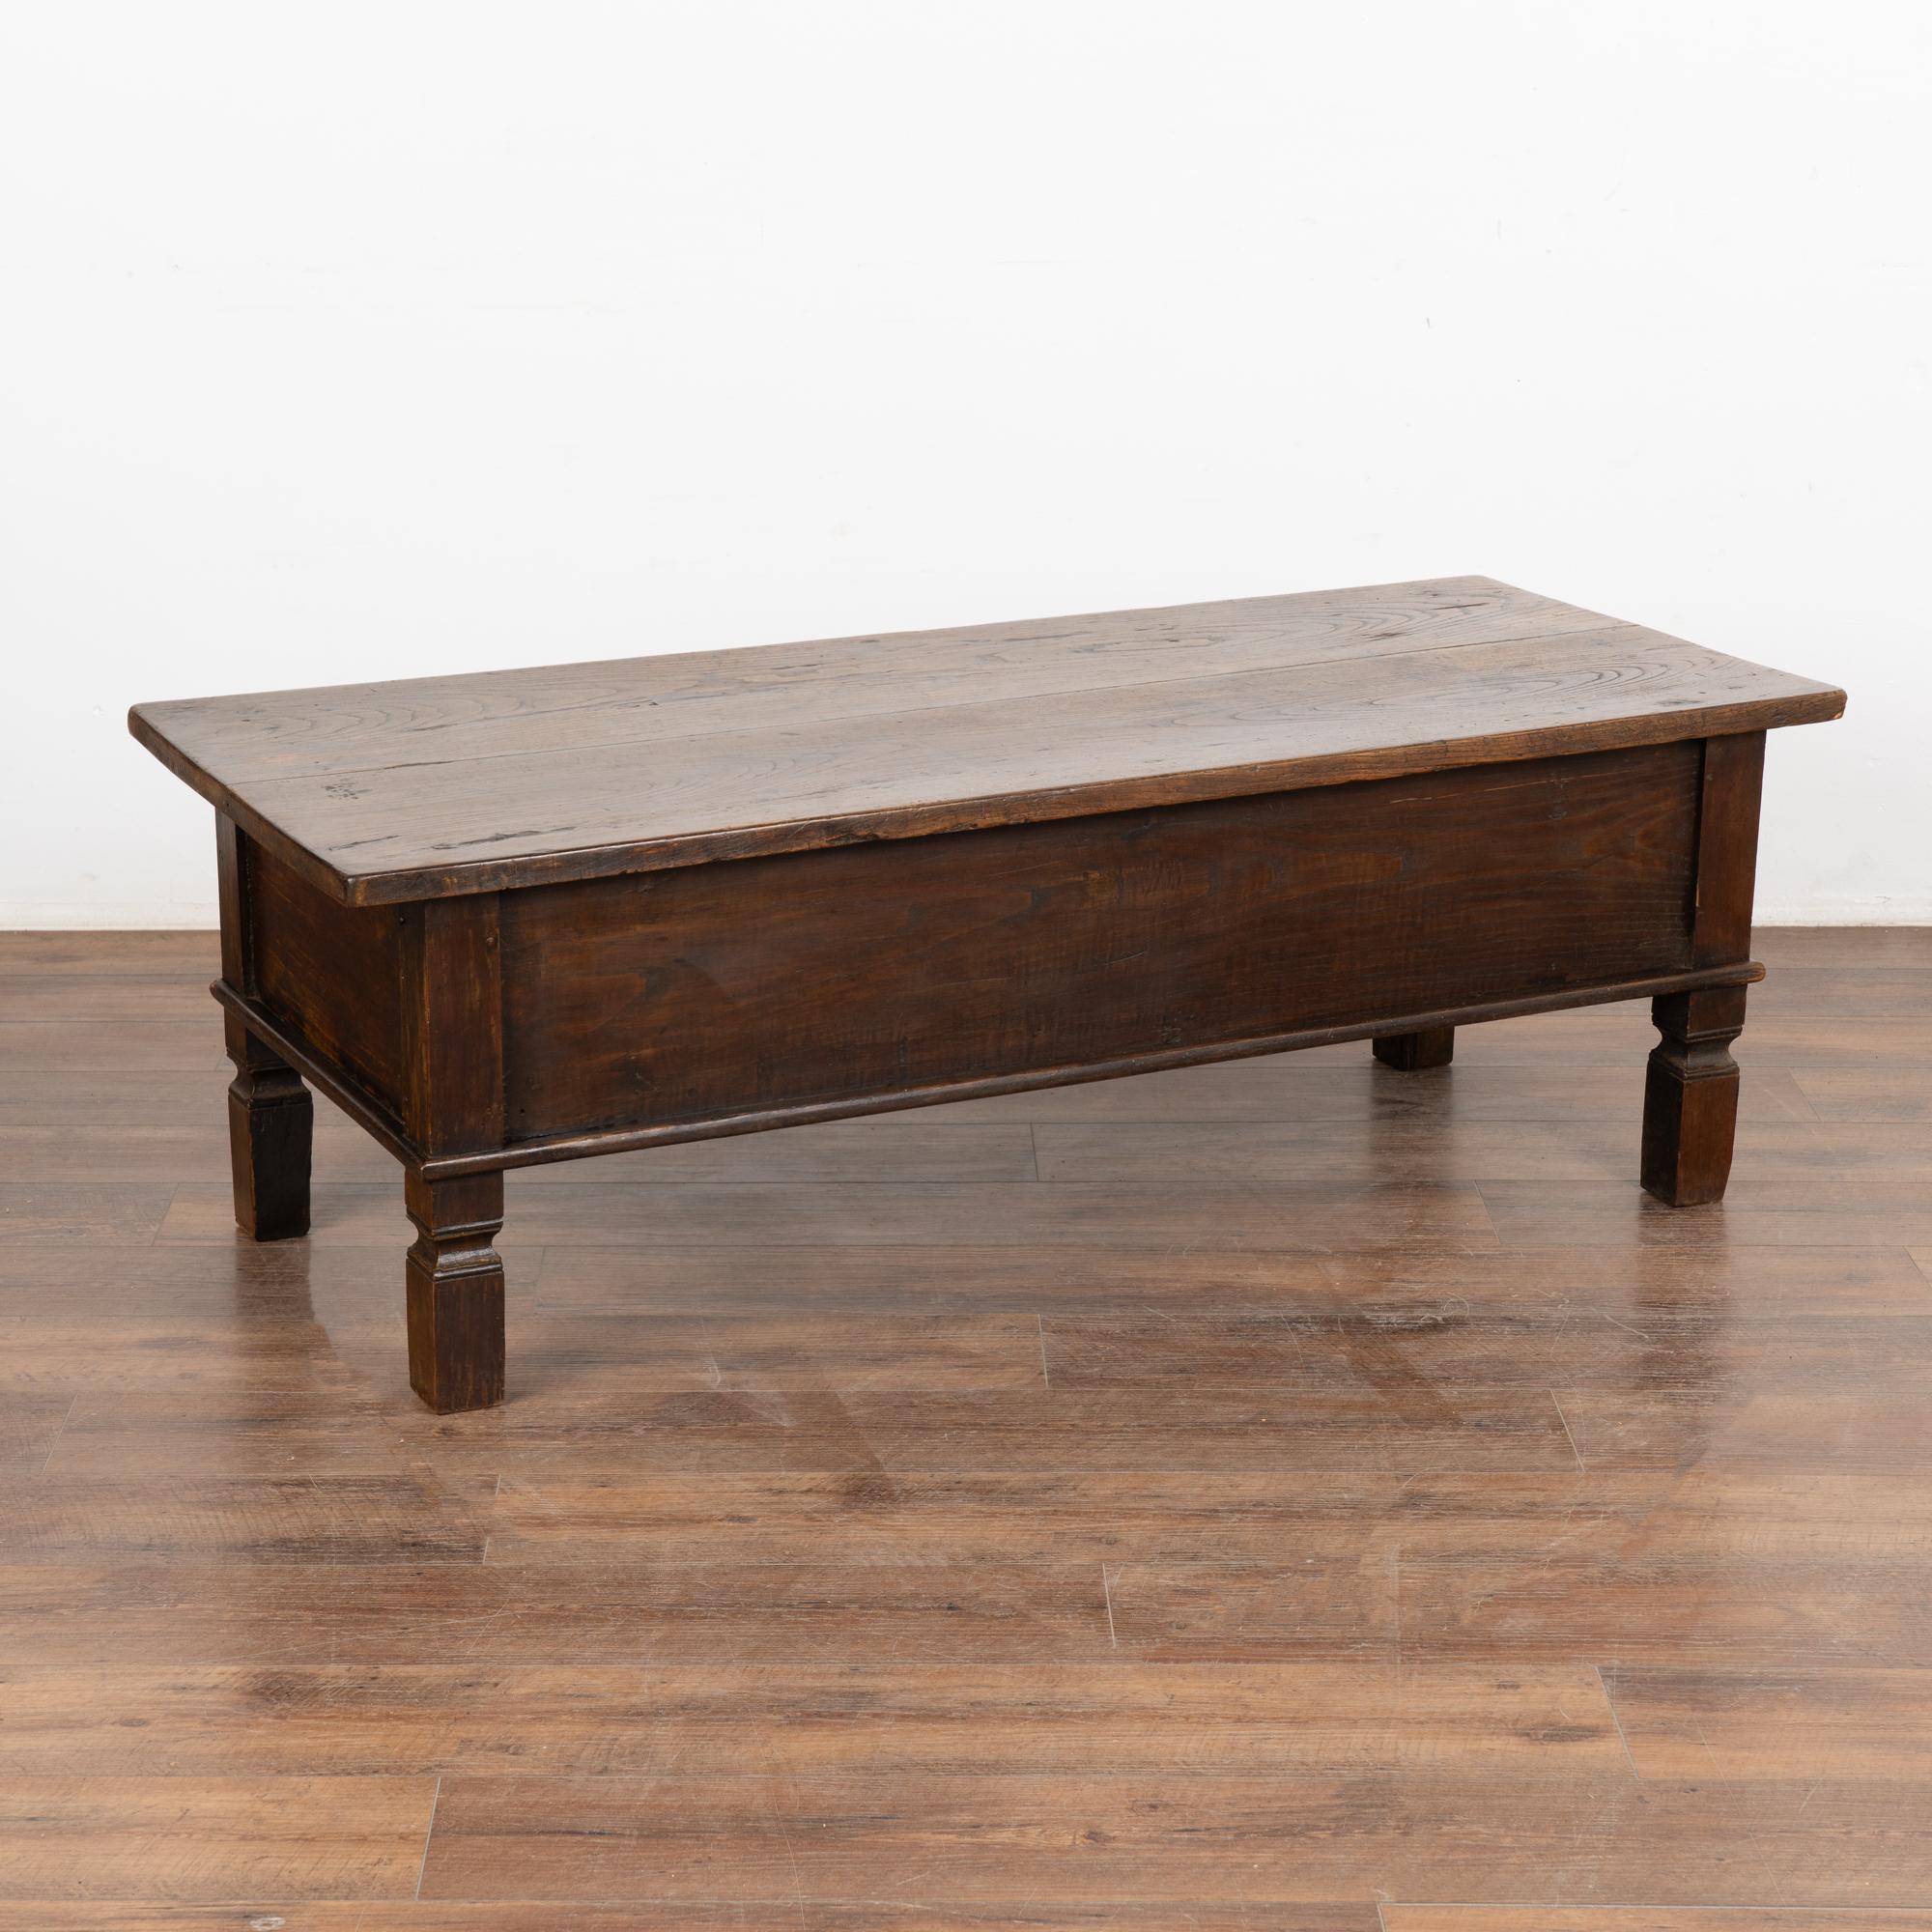 Two Drawer French Country Oak Coffee Table, circa 1820-40 For Sale 7